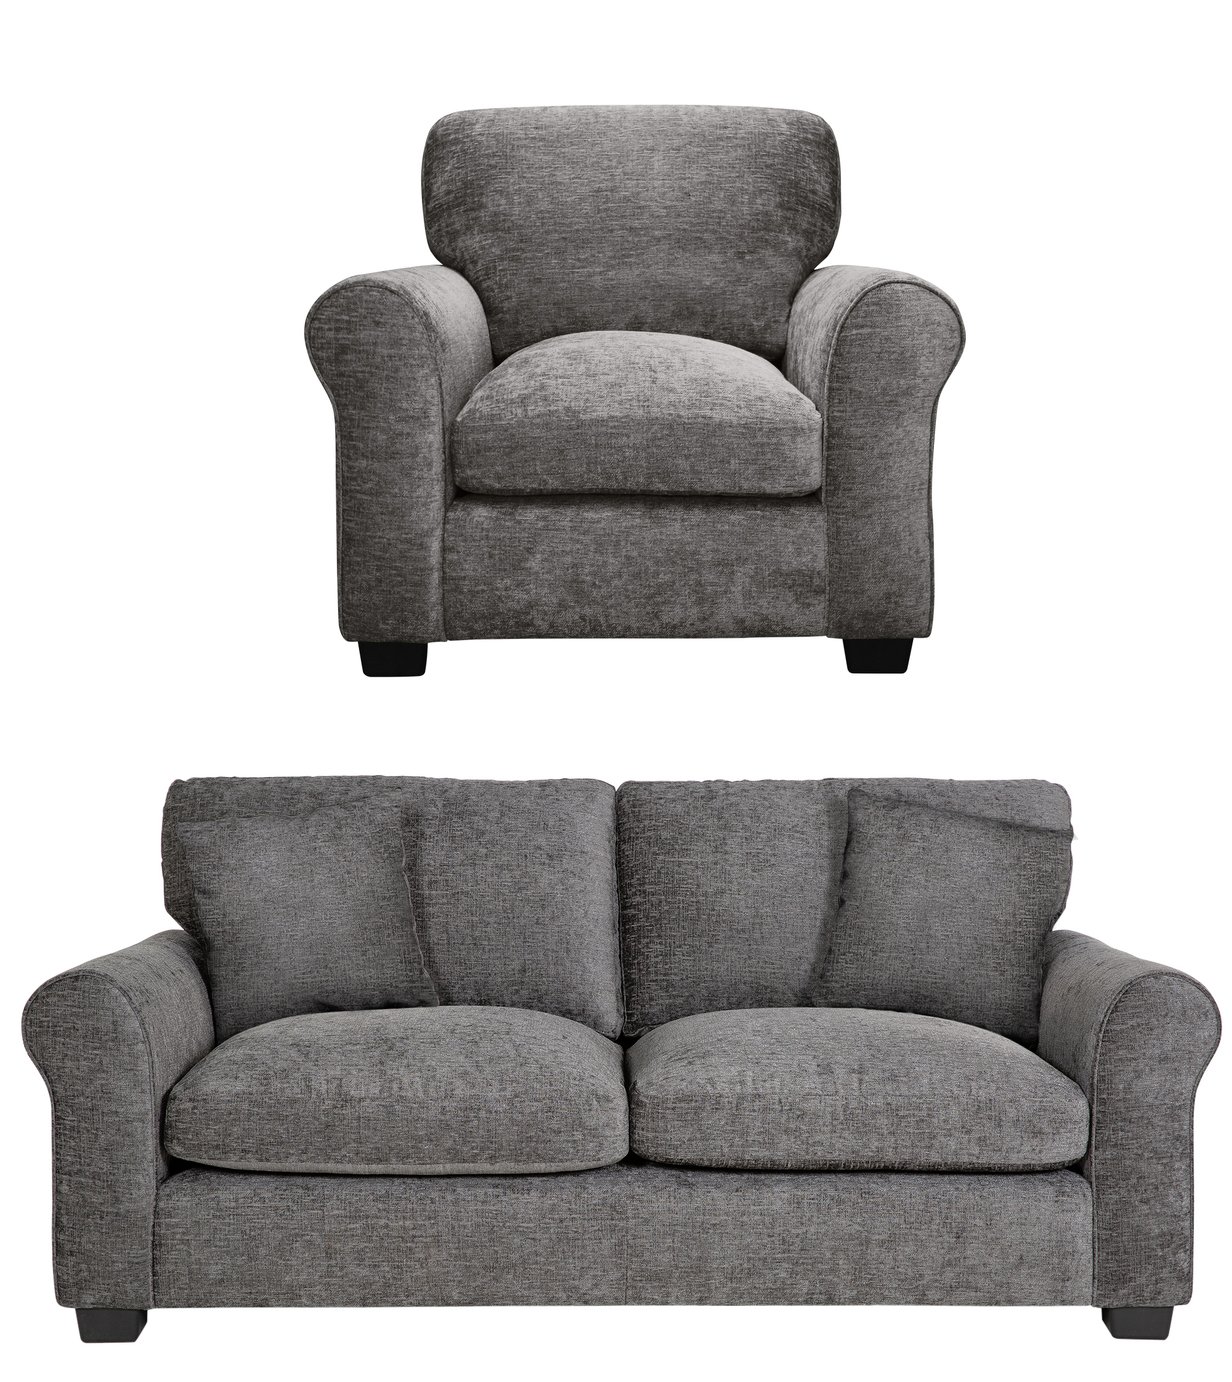 Argos Home Tammy Fabric Chair and 3 Seater Sofa - Charcoal